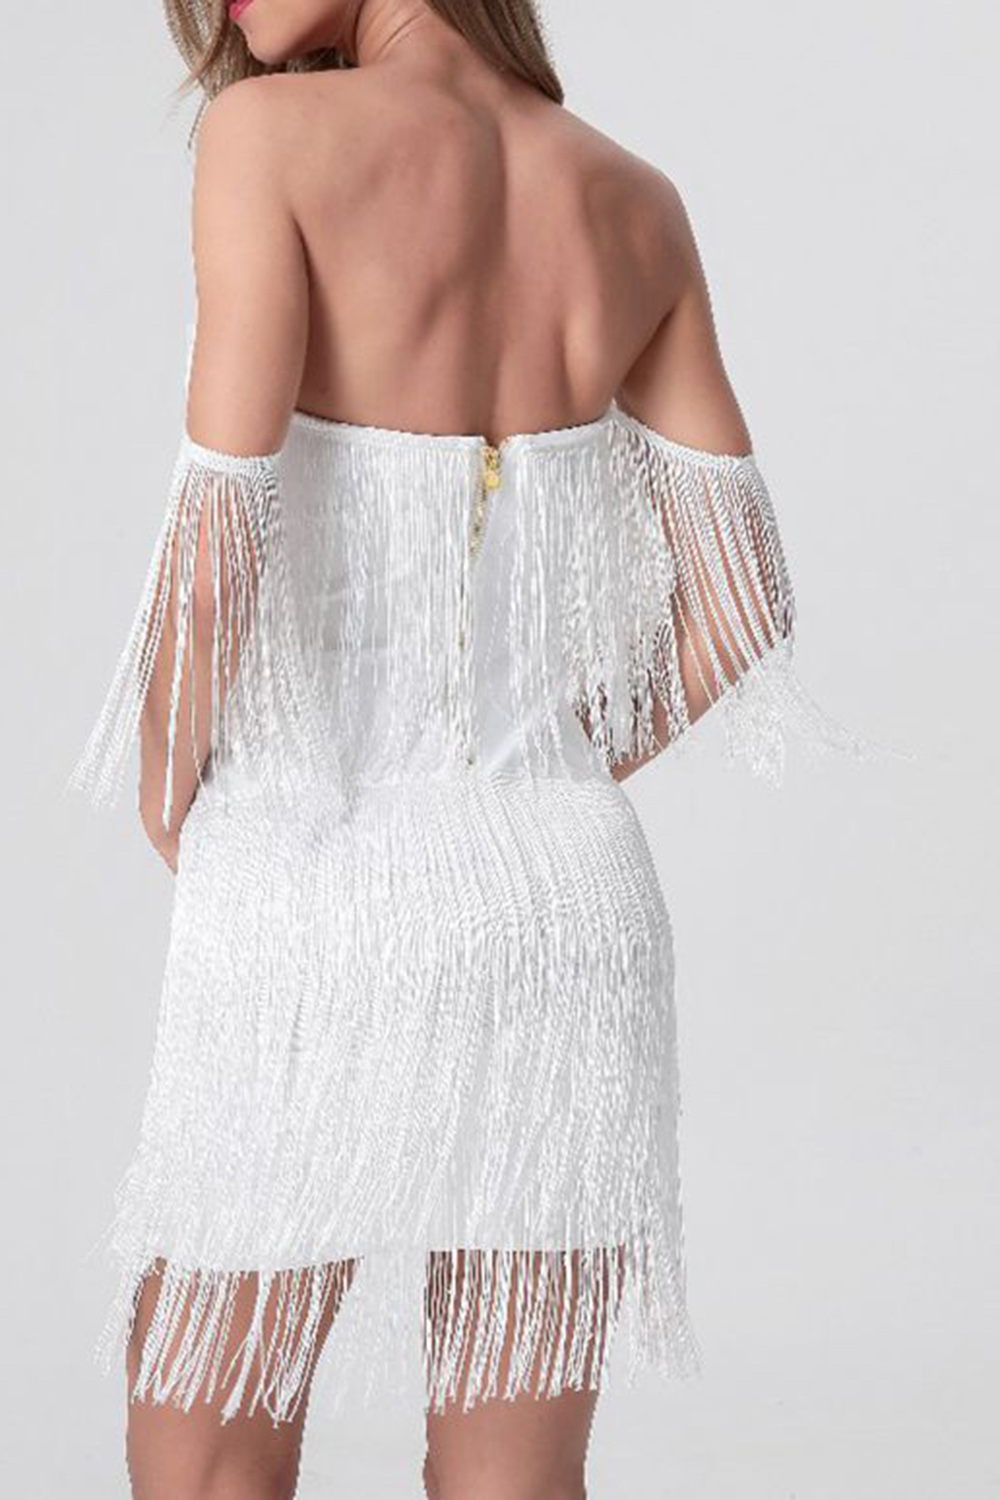 Bodycon Off the Shoulder Little White Dress with Tassel